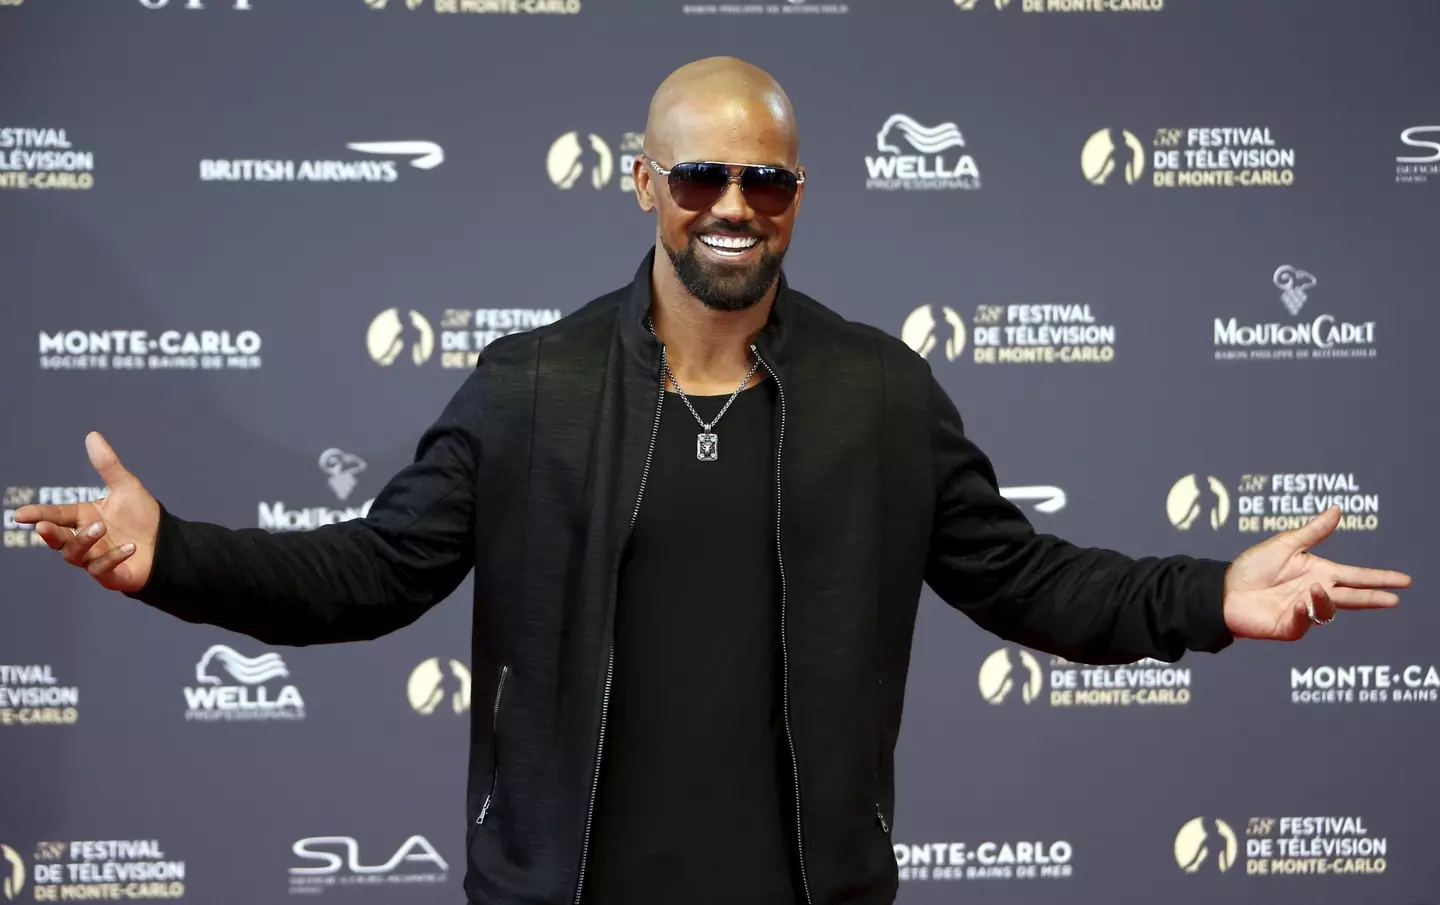 Shemar Moore announced he had a child on the way earlier this month.